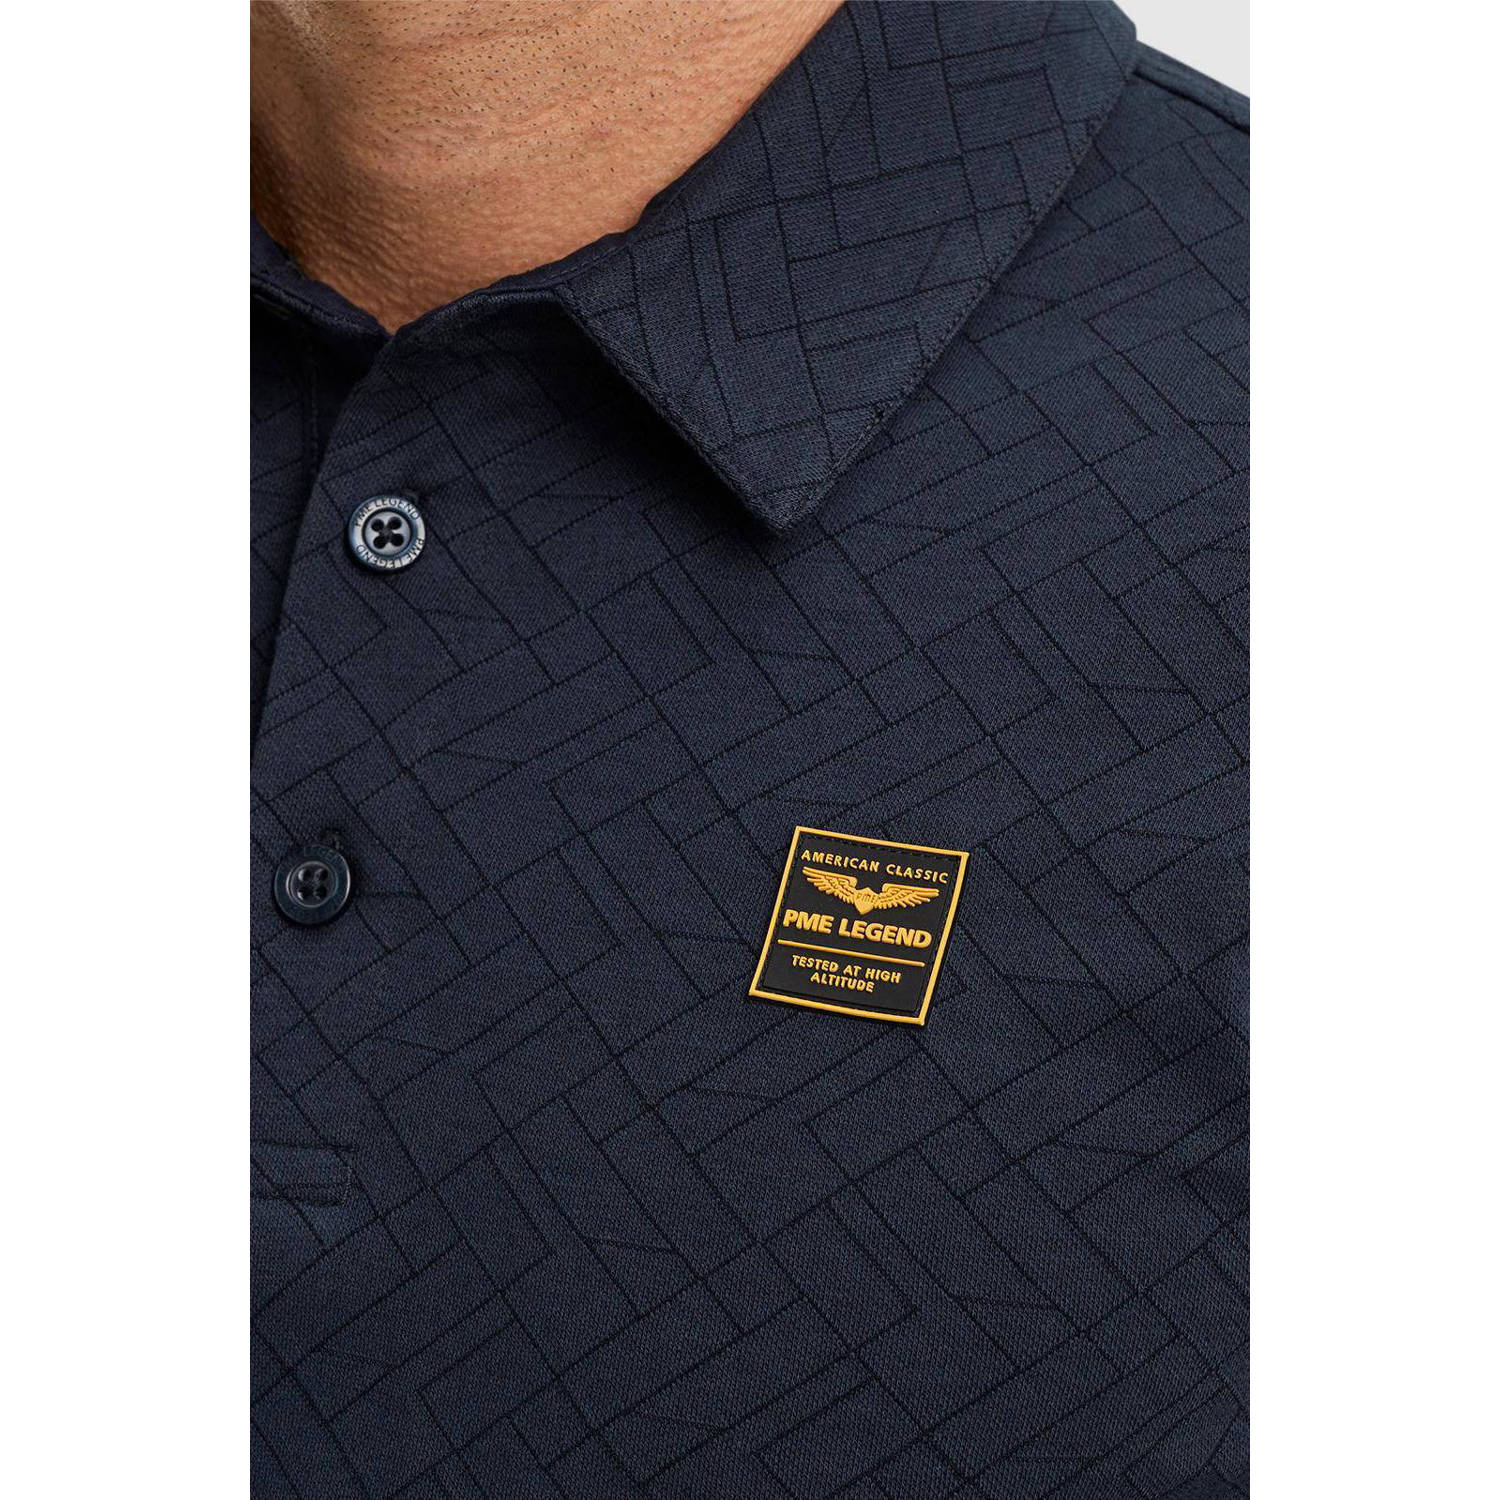 PME Legend polo met all over print navy